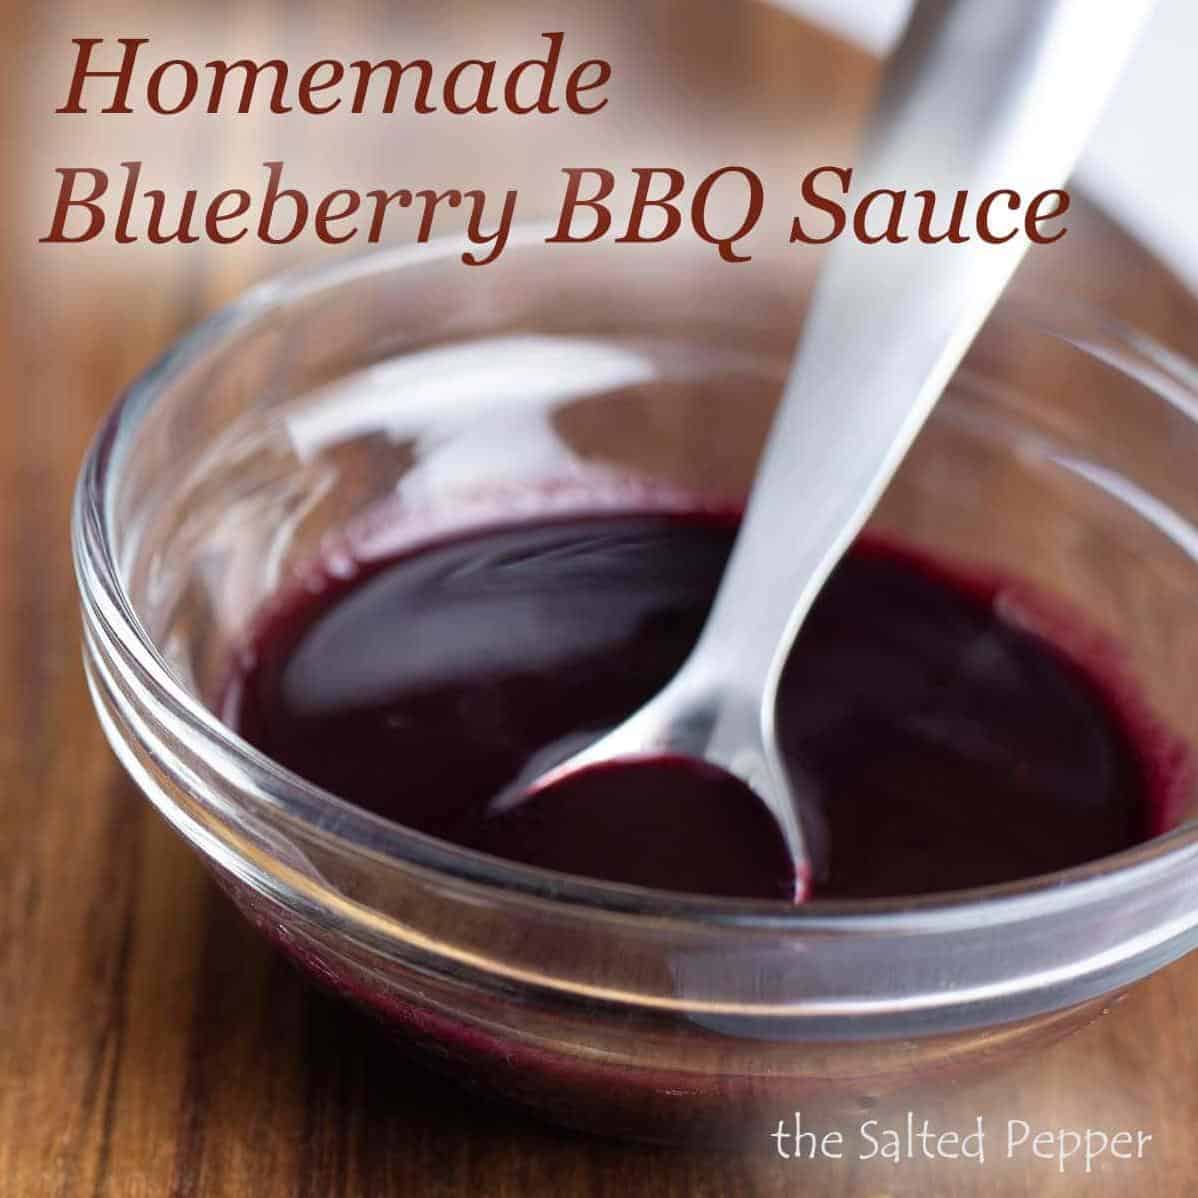  Don't settle for plain old ketchup, try this Blueberry BBQ sauce on your fries.